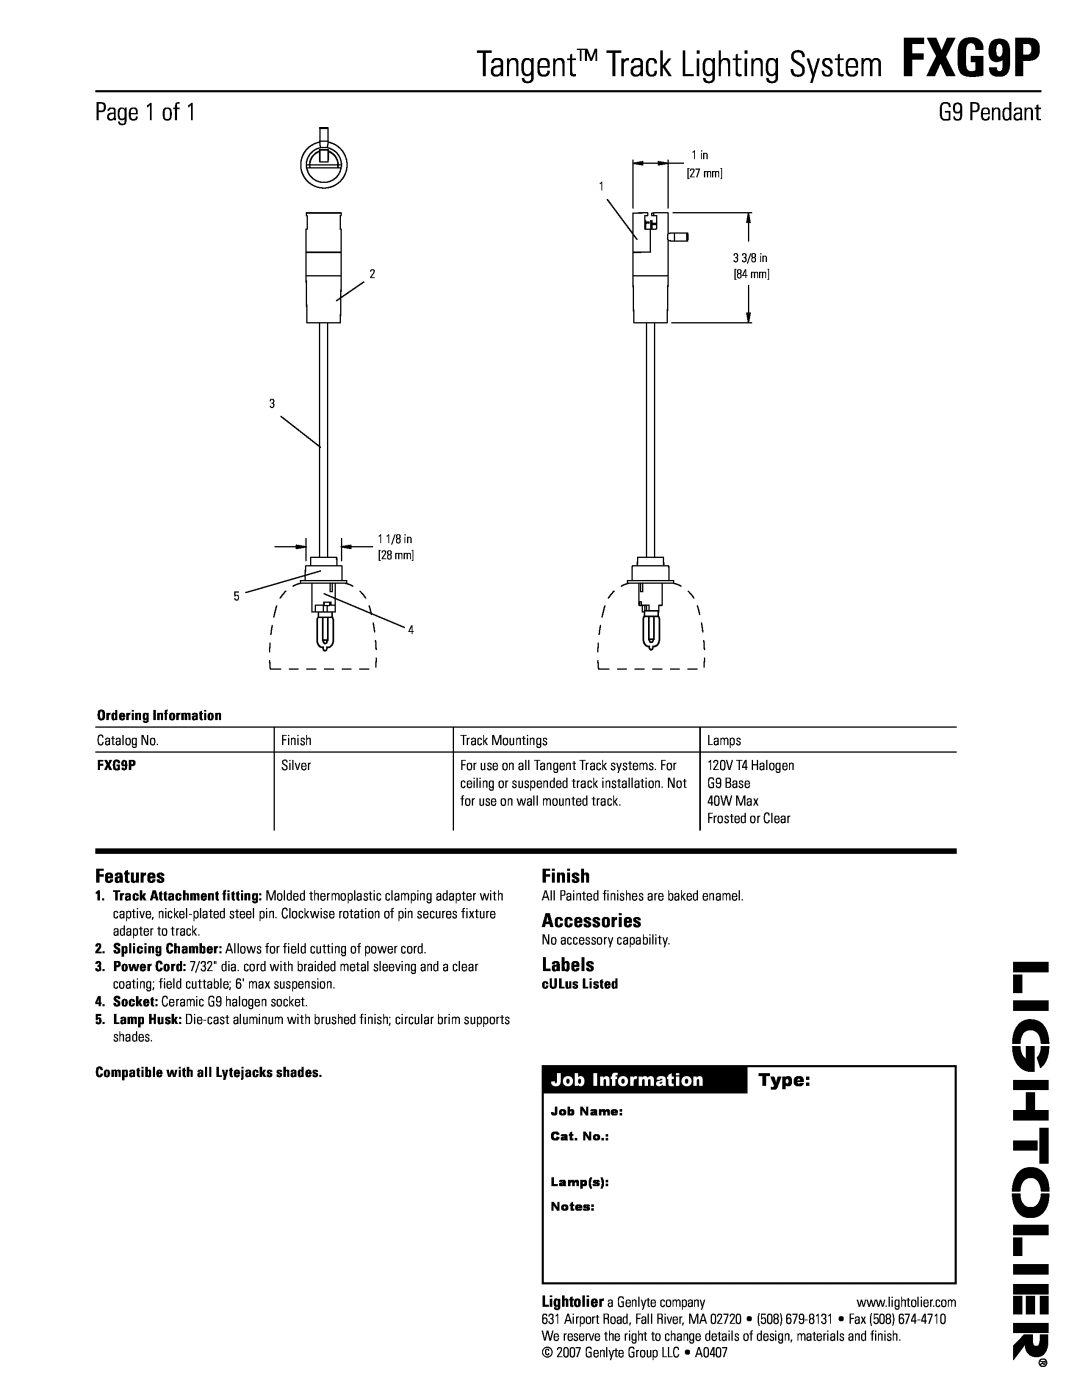 Lightolier manual Tangent Track Lighting System FXG9P, Page of, G9 Pendant, Features, Finish, Accessories, Labels, Type 